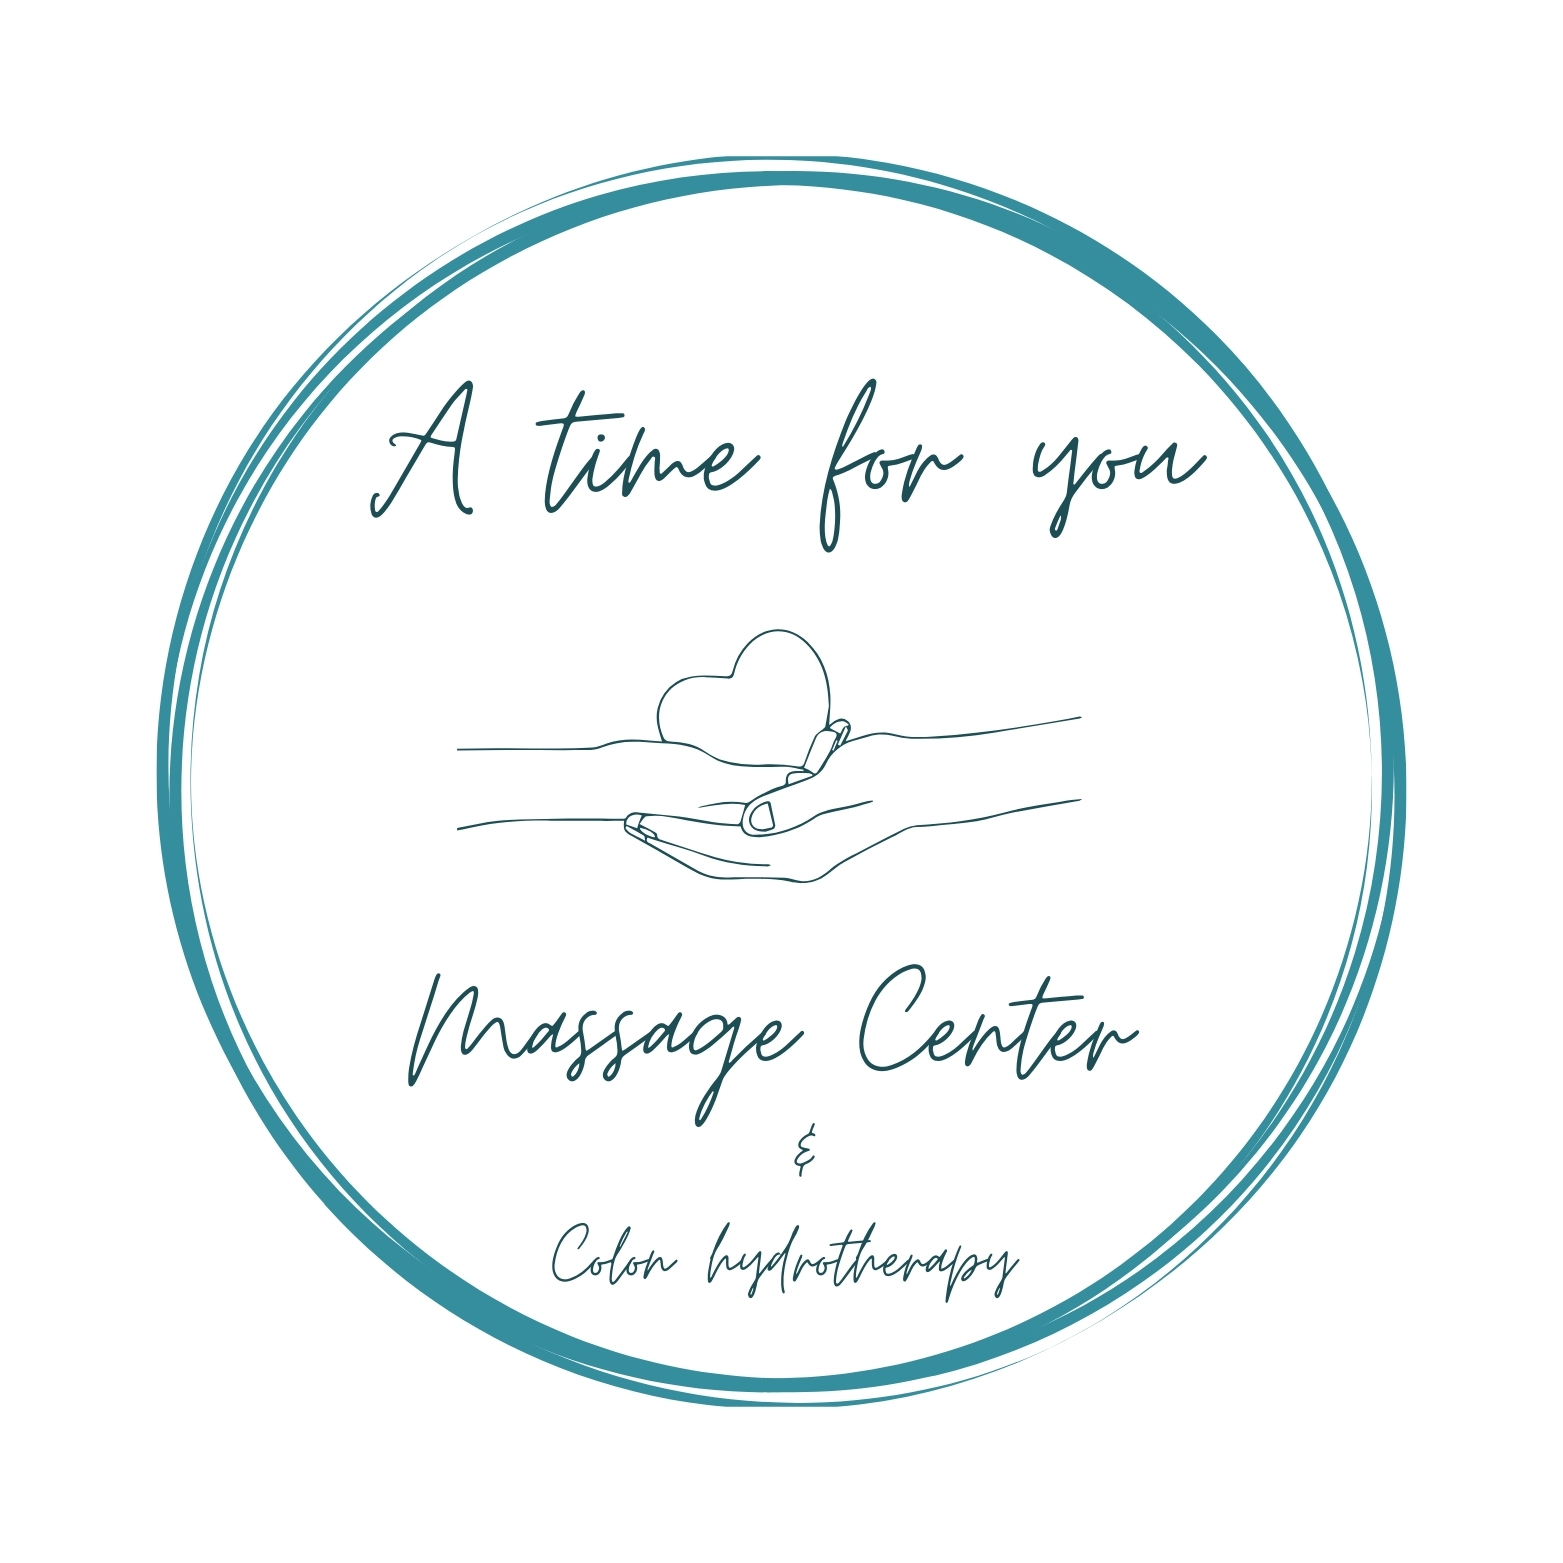 A Time for you Massage and Colon Hydro-Therapy